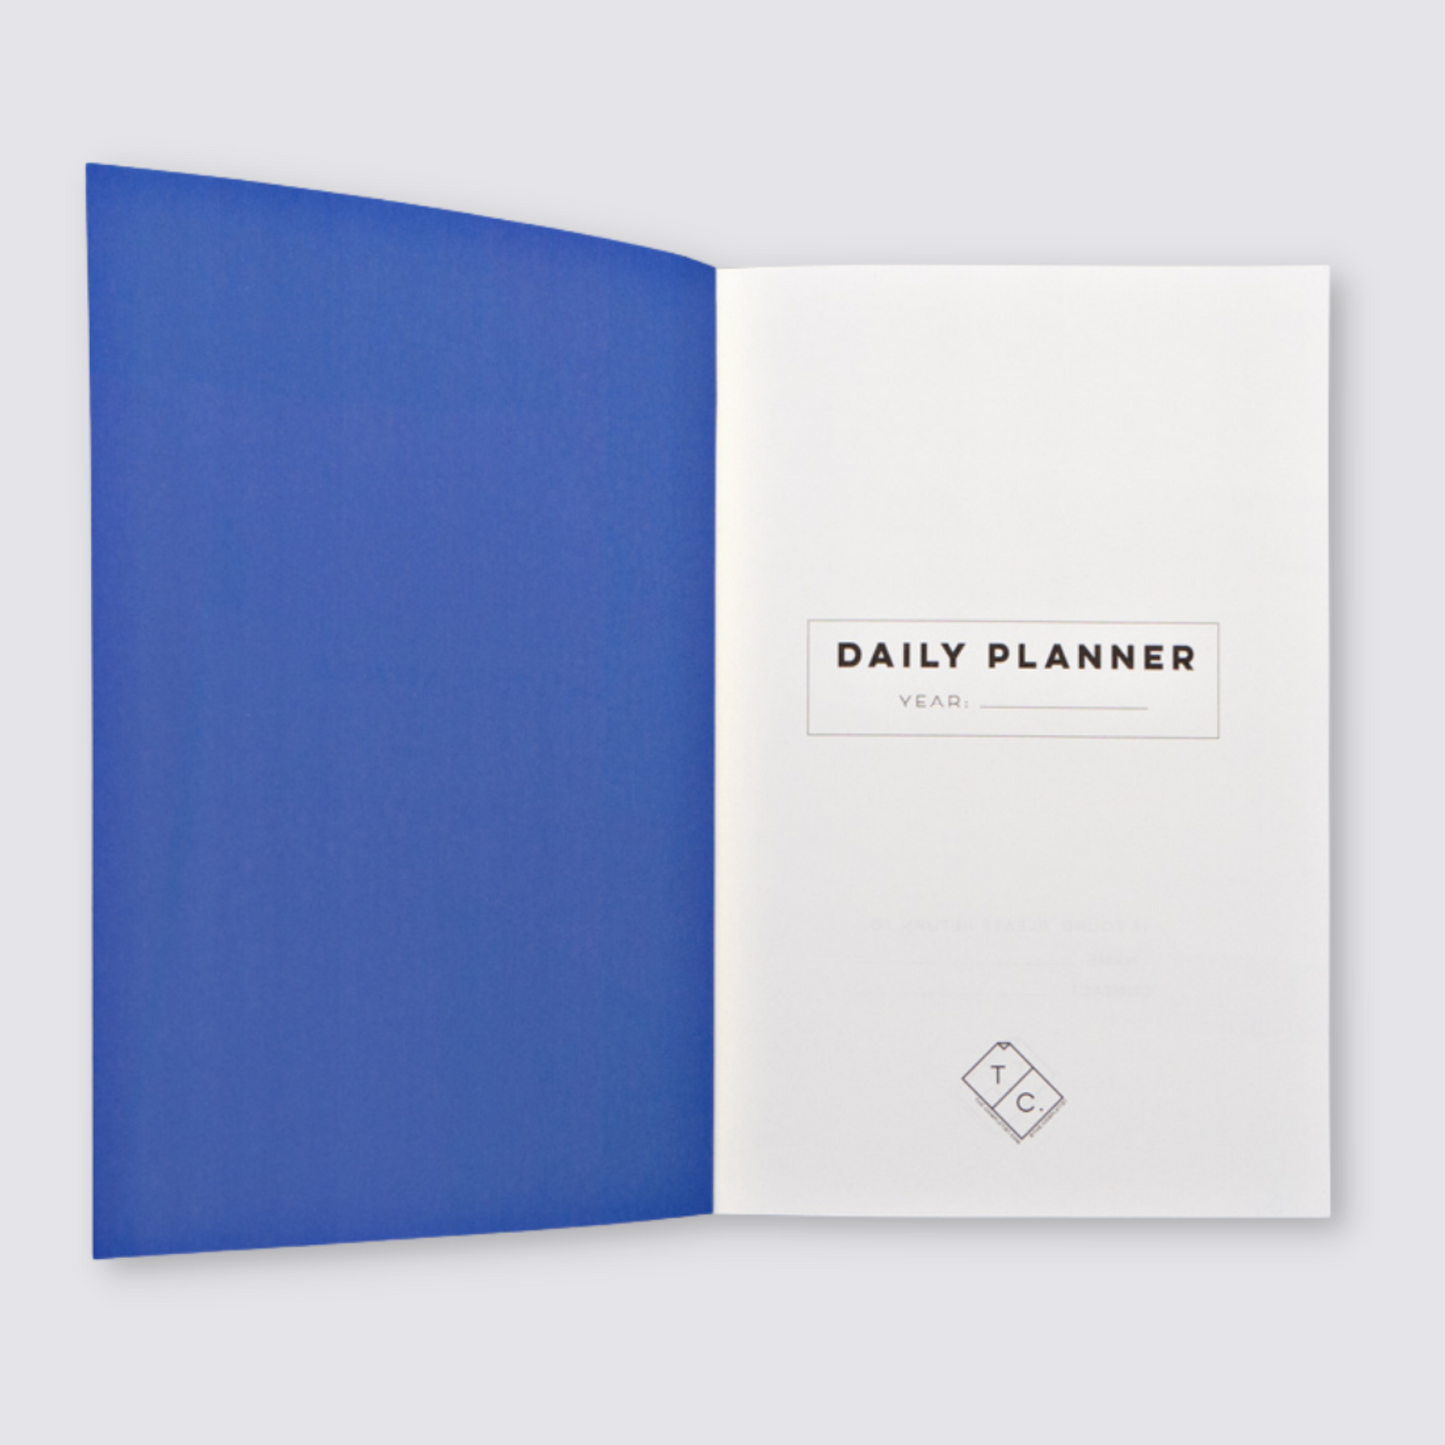 Athens No. 1 Daily Planner